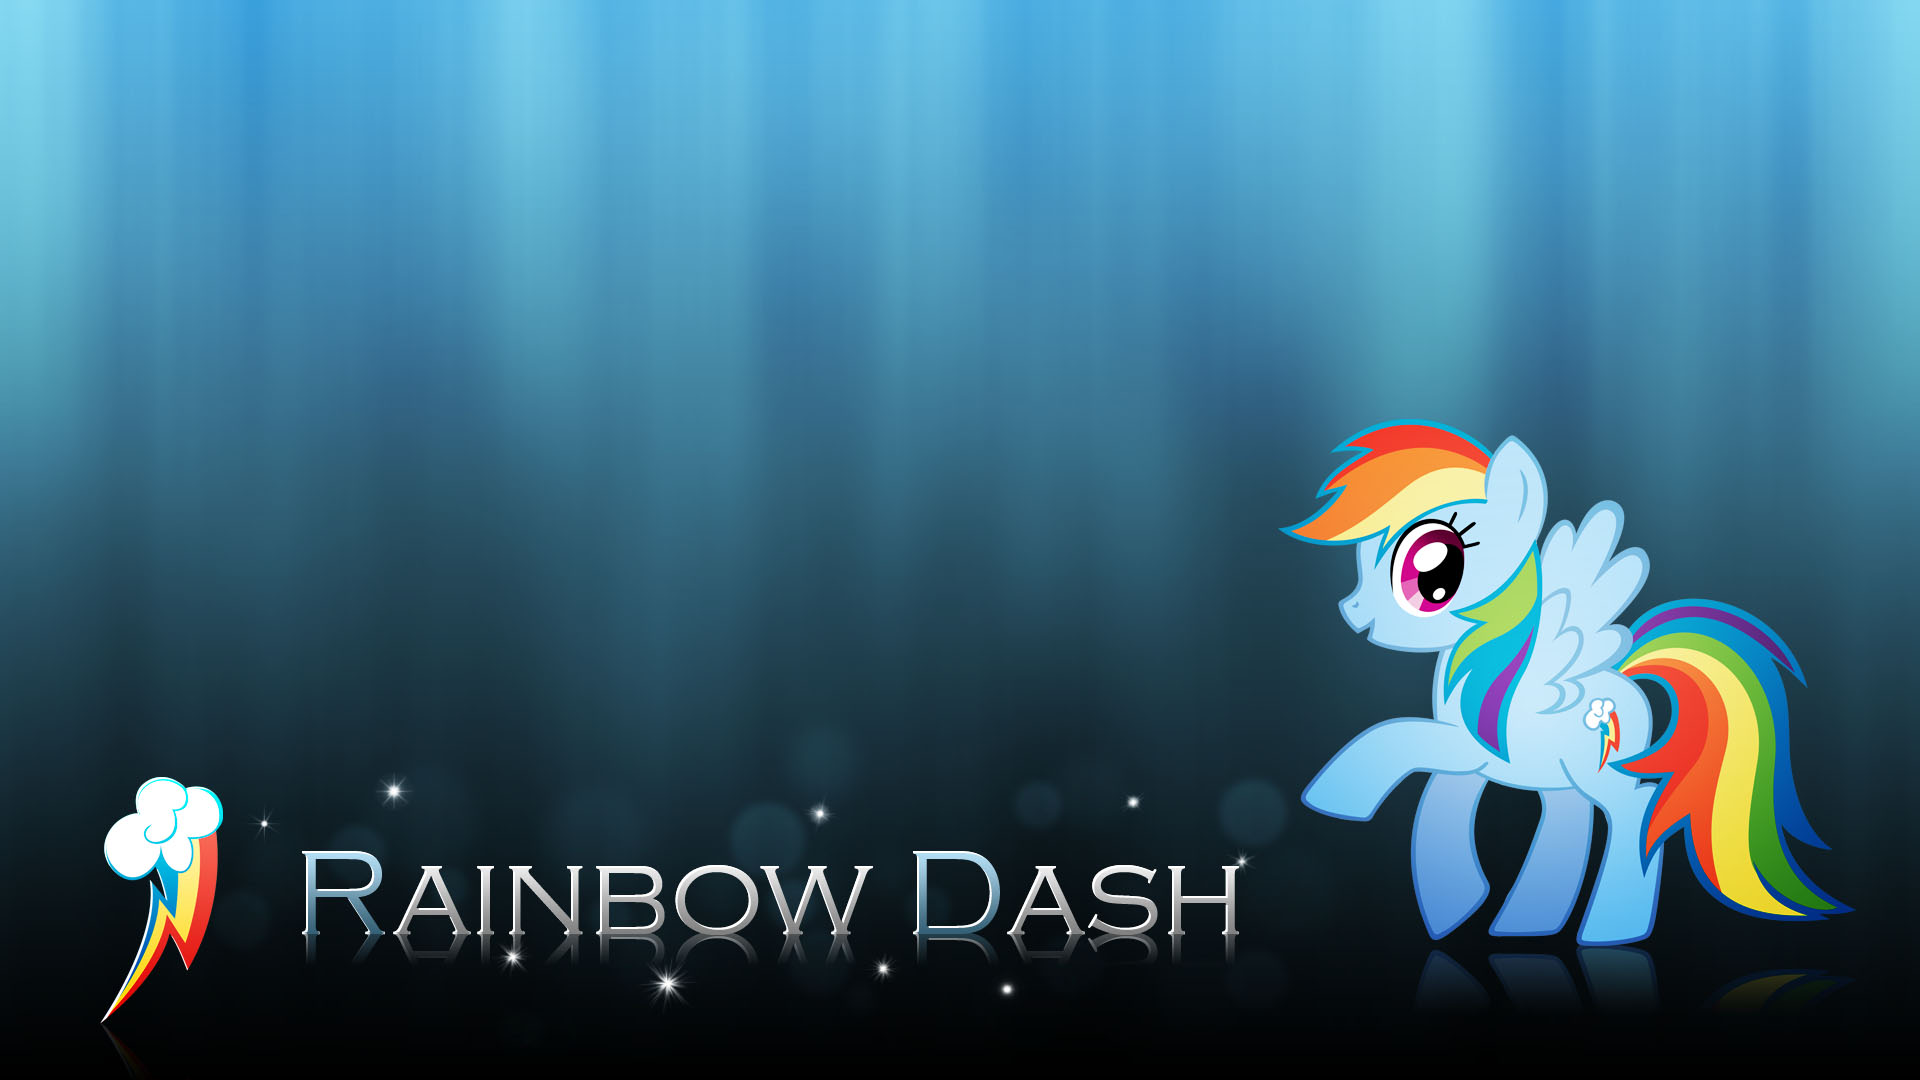 Generic Rainbow Dash Wallpaper by Esipode